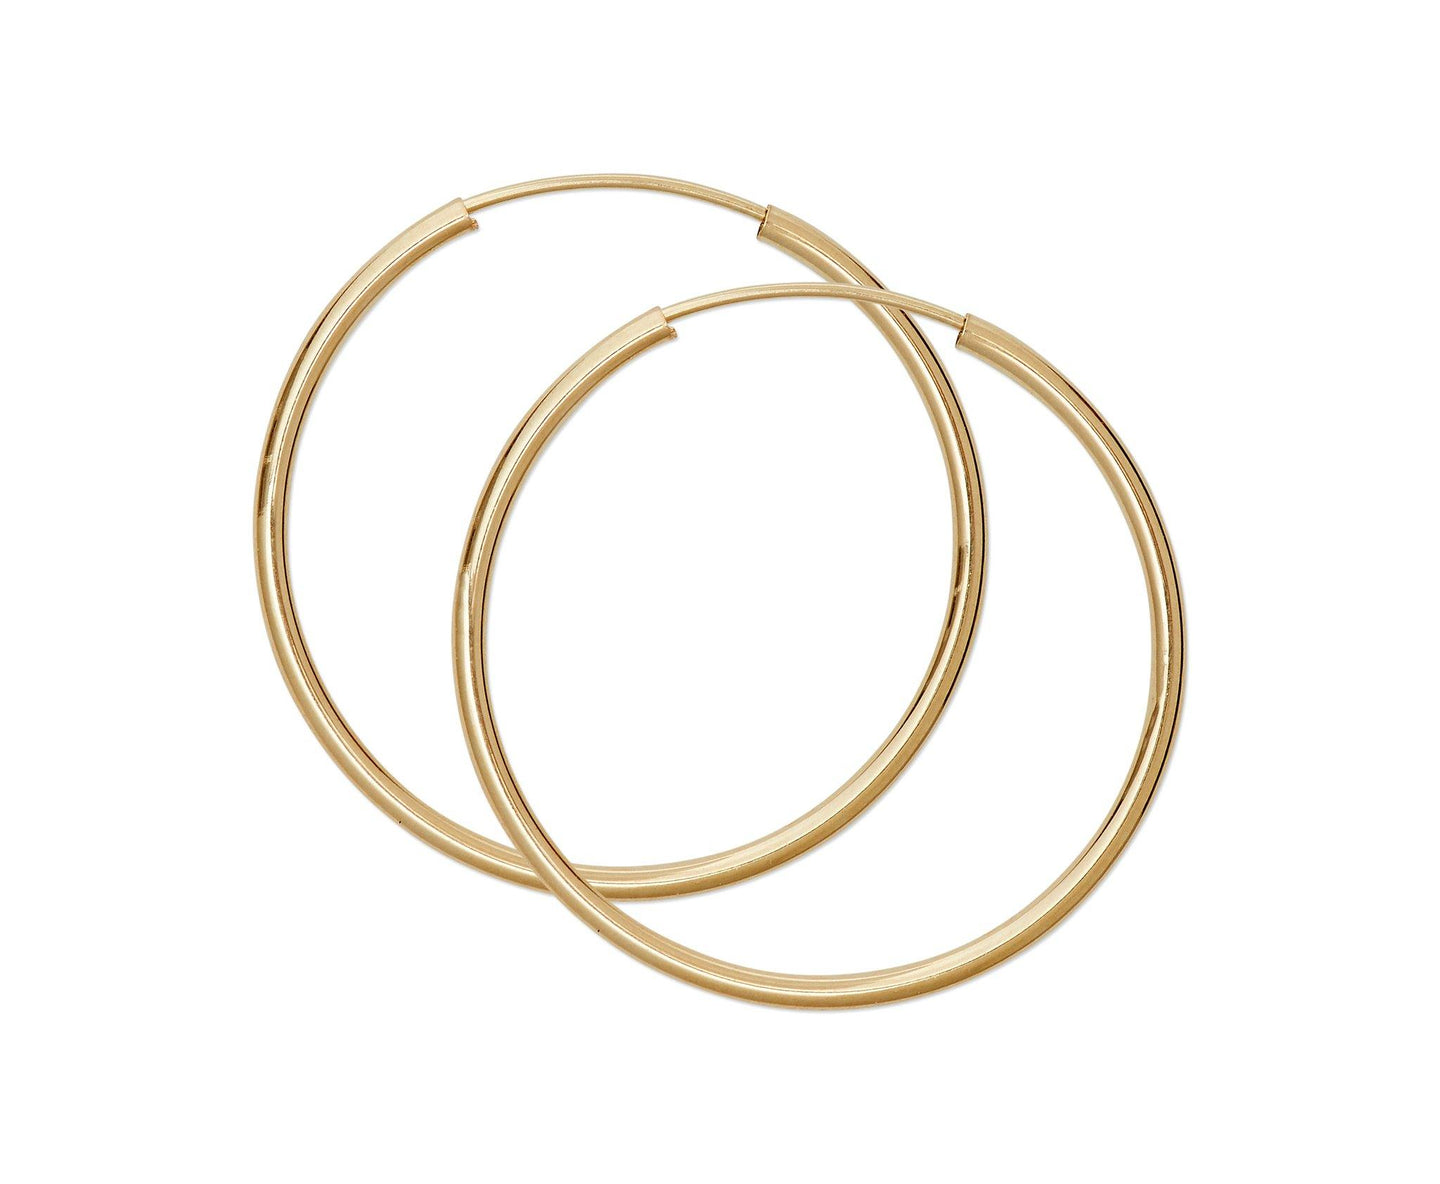 Medium Thin Hoops - InclusiveJewelry